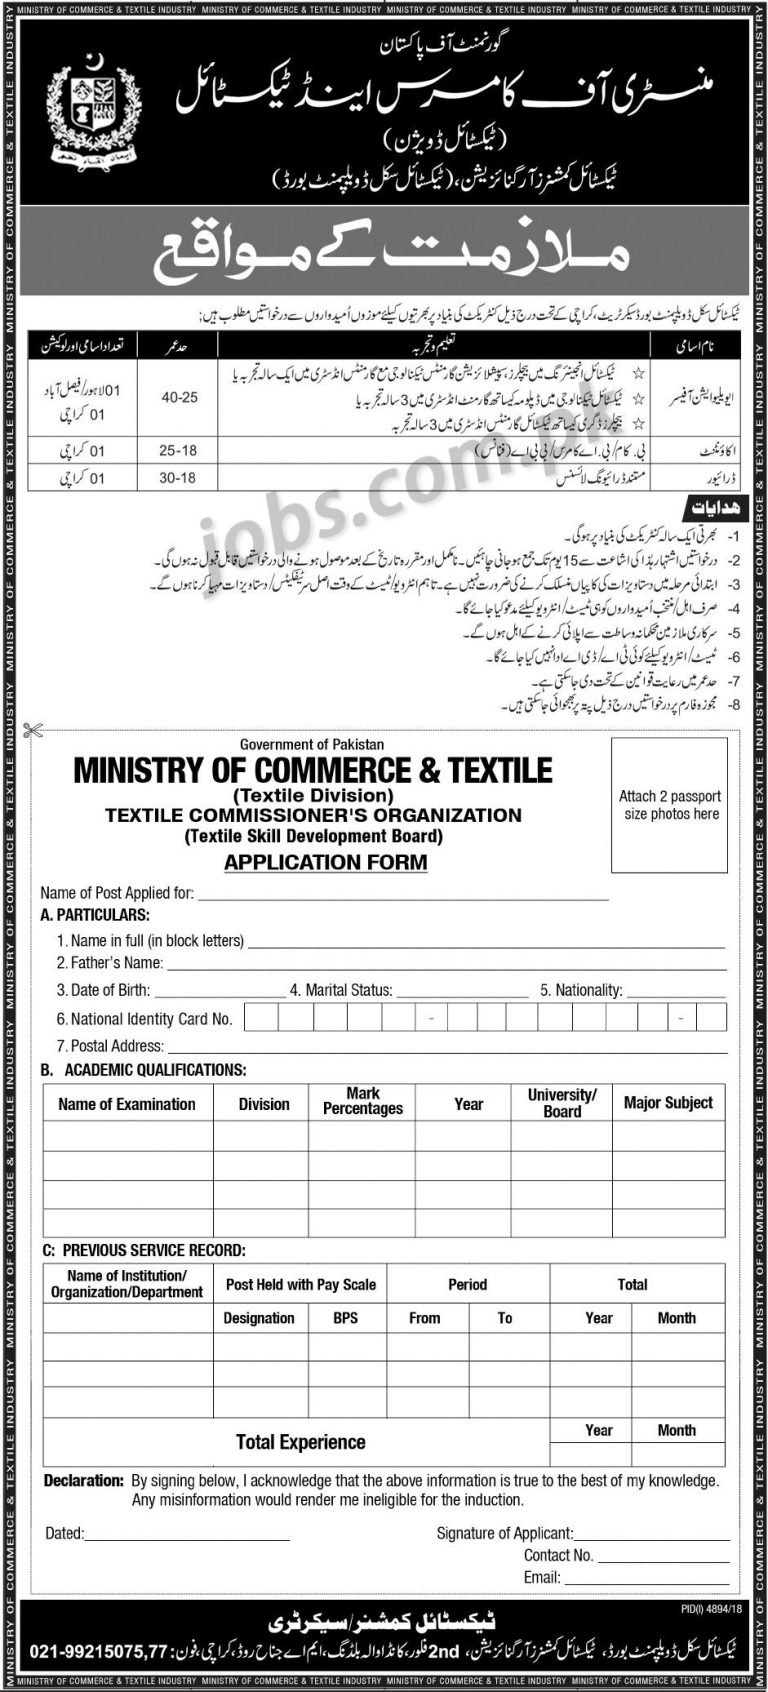 Ministry of Commerce & Textile Pakistan Jobs 2019 for Evaluation Officers, Accountant & Driver Posts